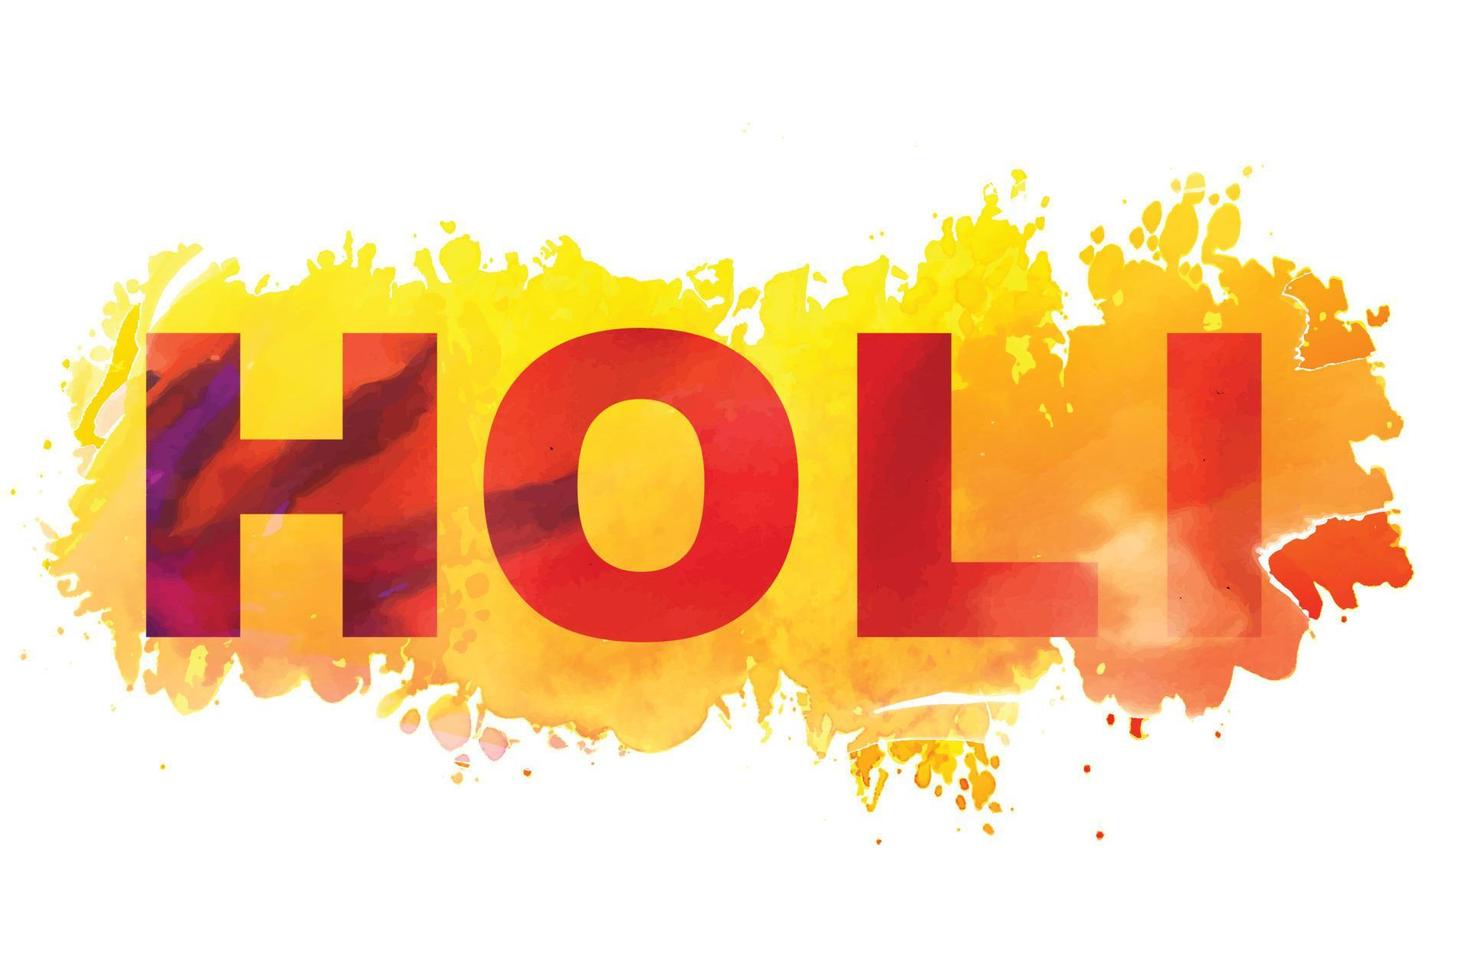 Happy holi background with colorful text splash background vector